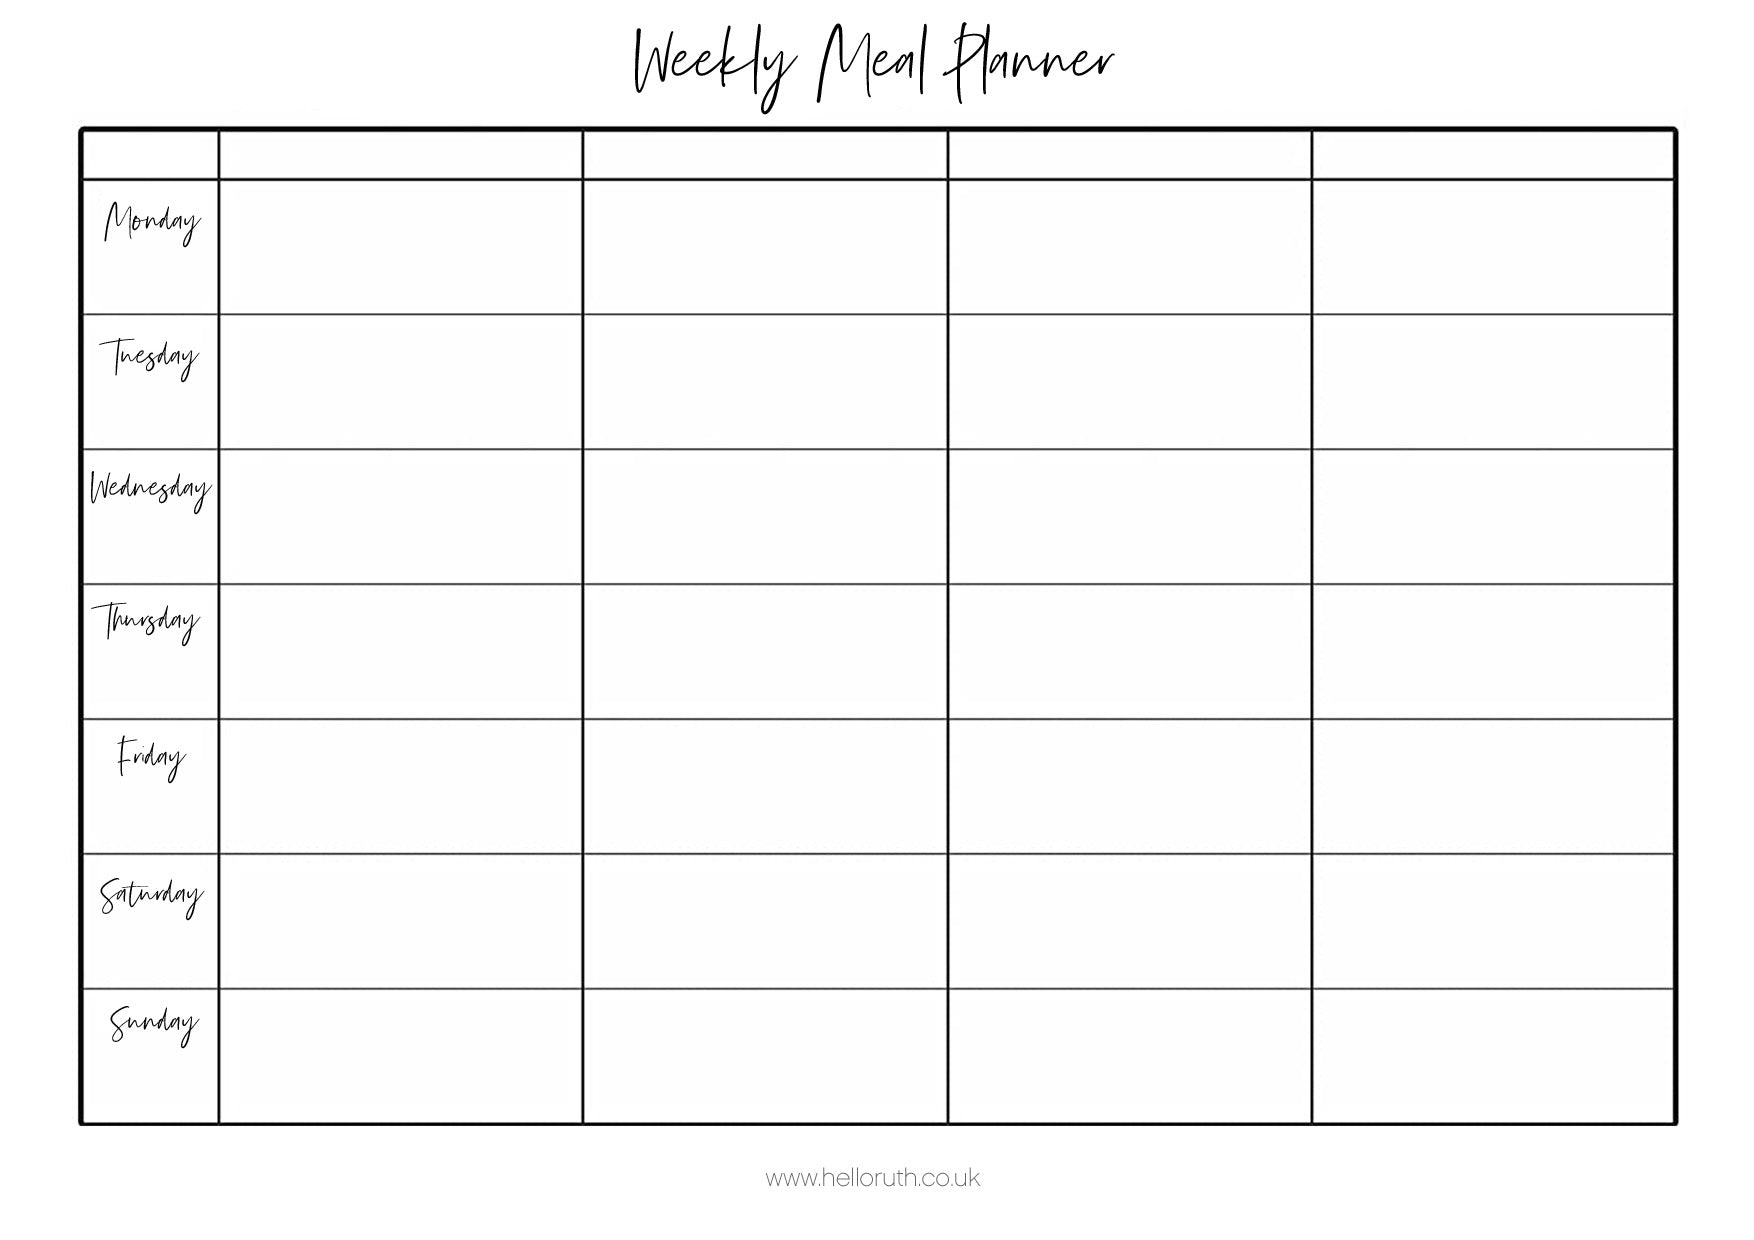 Monthly meal planner printable - Hello Ruth